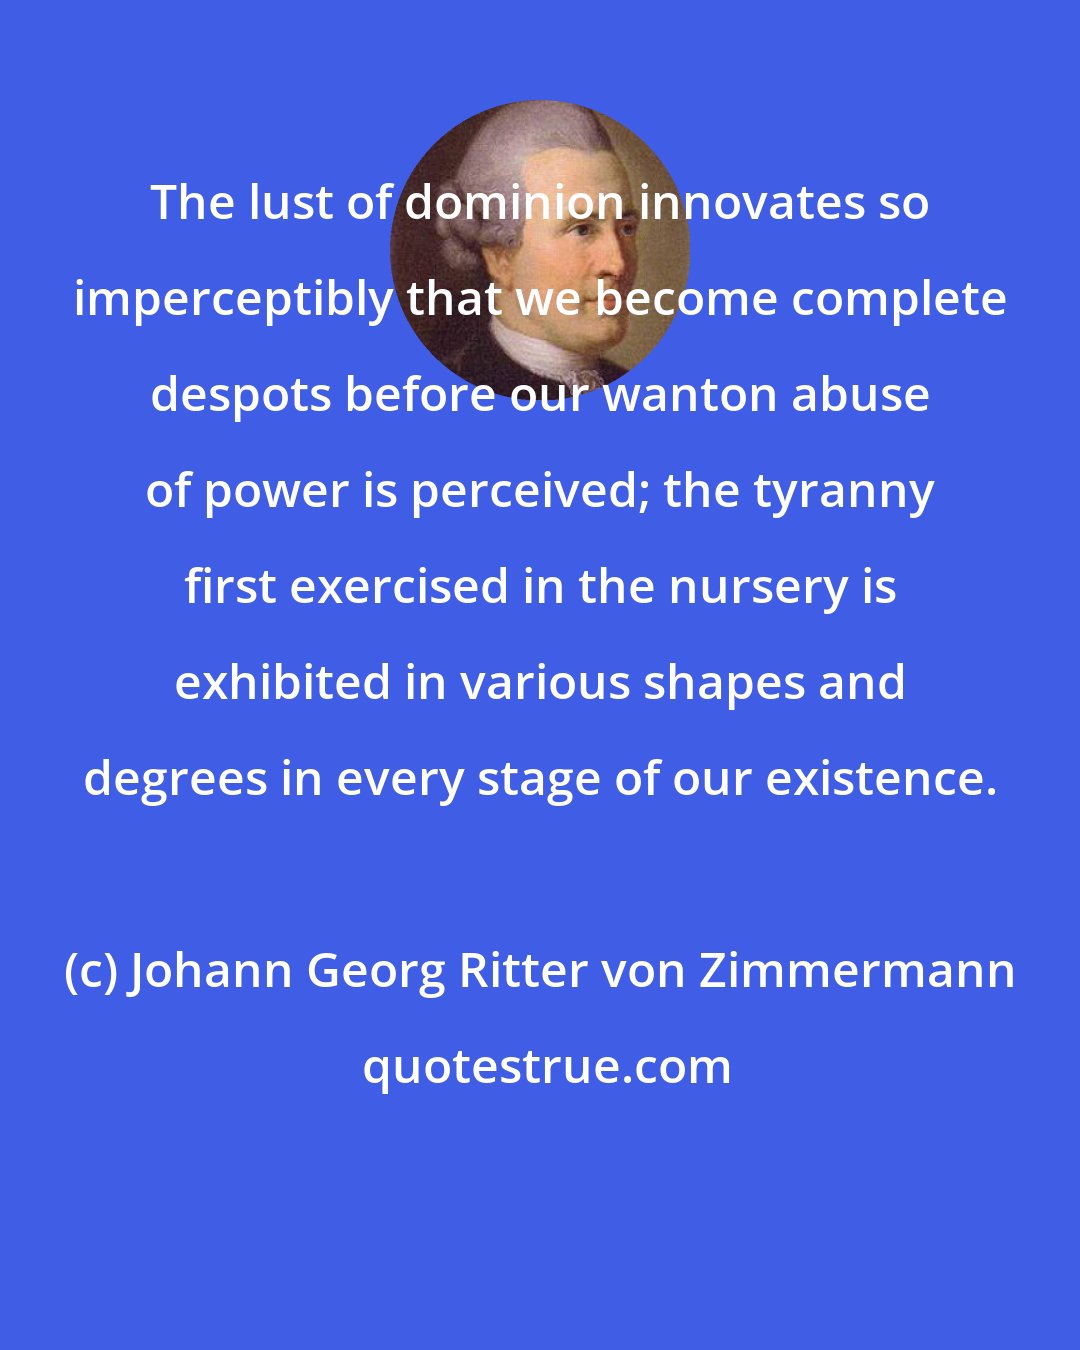 Johann Georg Ritter von Zimmermann: The lust of dominion innovates so imperceptibly that we become complete despots before our wanton abuse of power is perceived; the tyranny first exercised in the nursery is exhibited in various shapes and degrees in every stage of our existence.